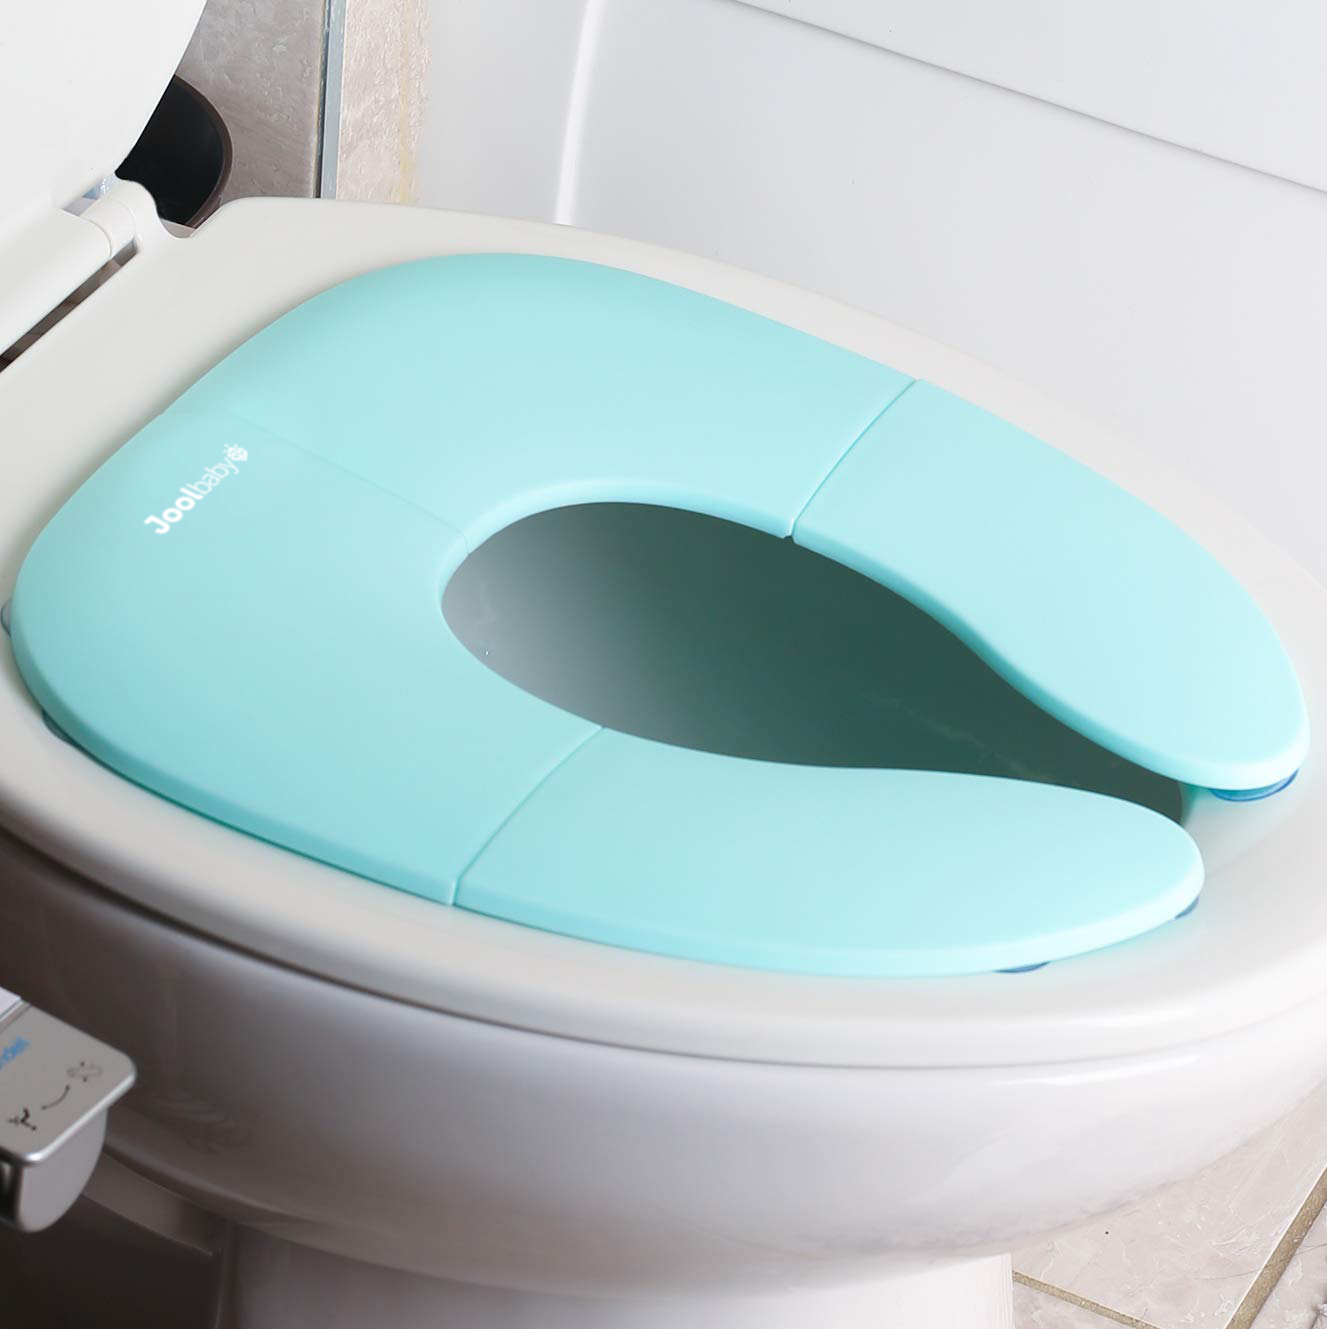  Real Feel Potty with Wipes Storage, Transition Seat &  Disposable Liners - Realistic Toilet - Easy to Clean & Assemble - Jool Baby  (Aqua) : Baby